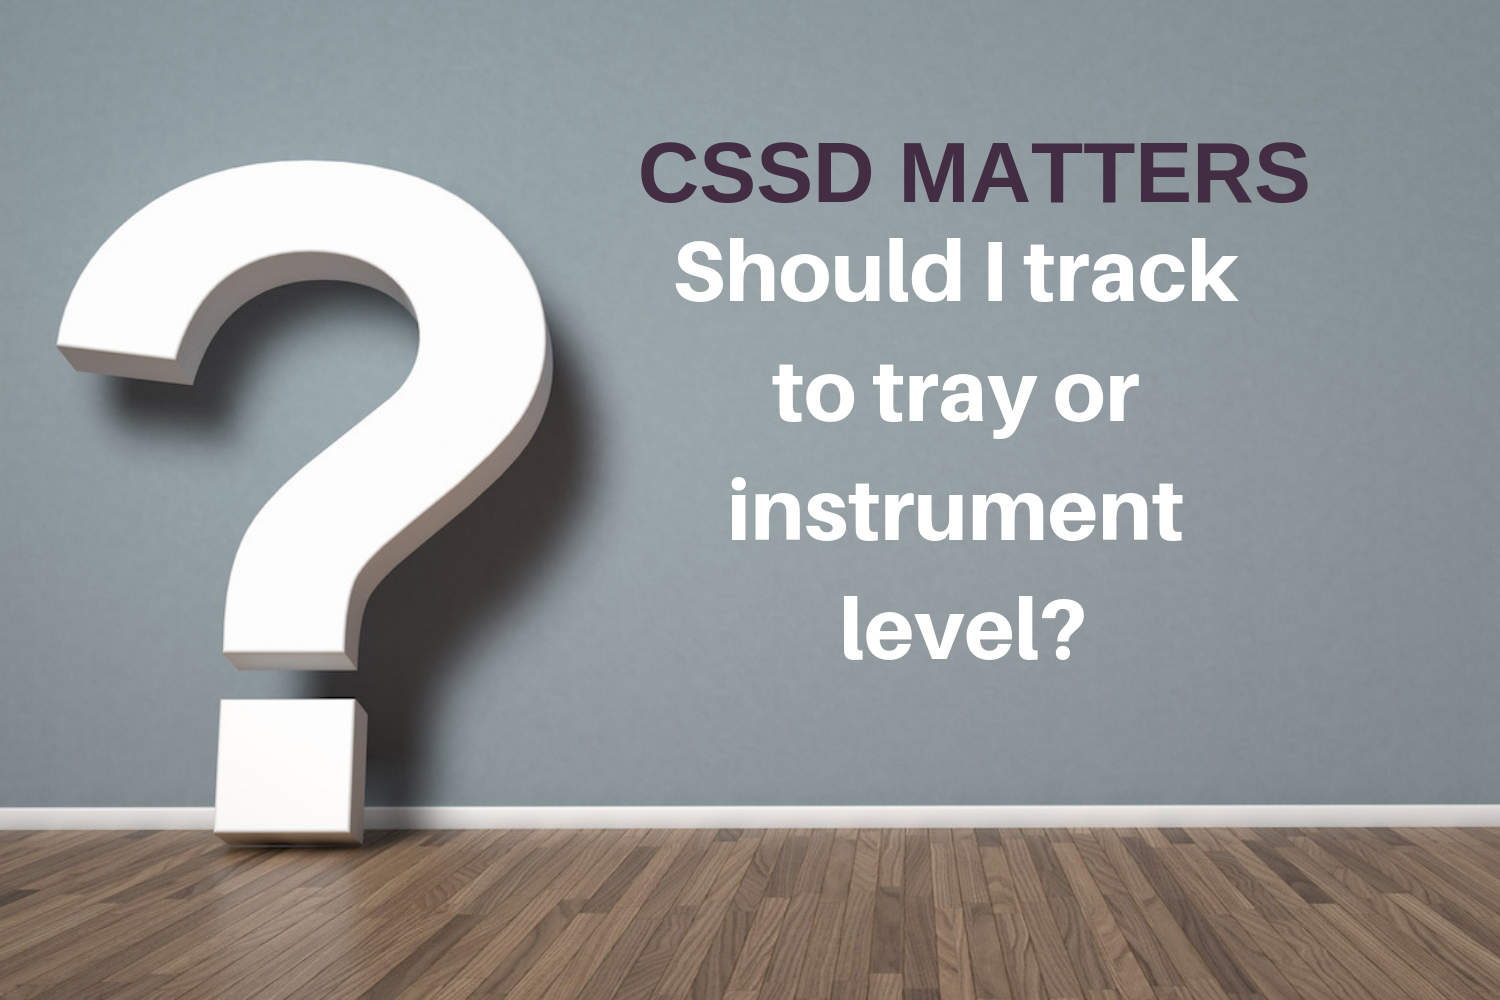 Should I track to tray or instrument level?